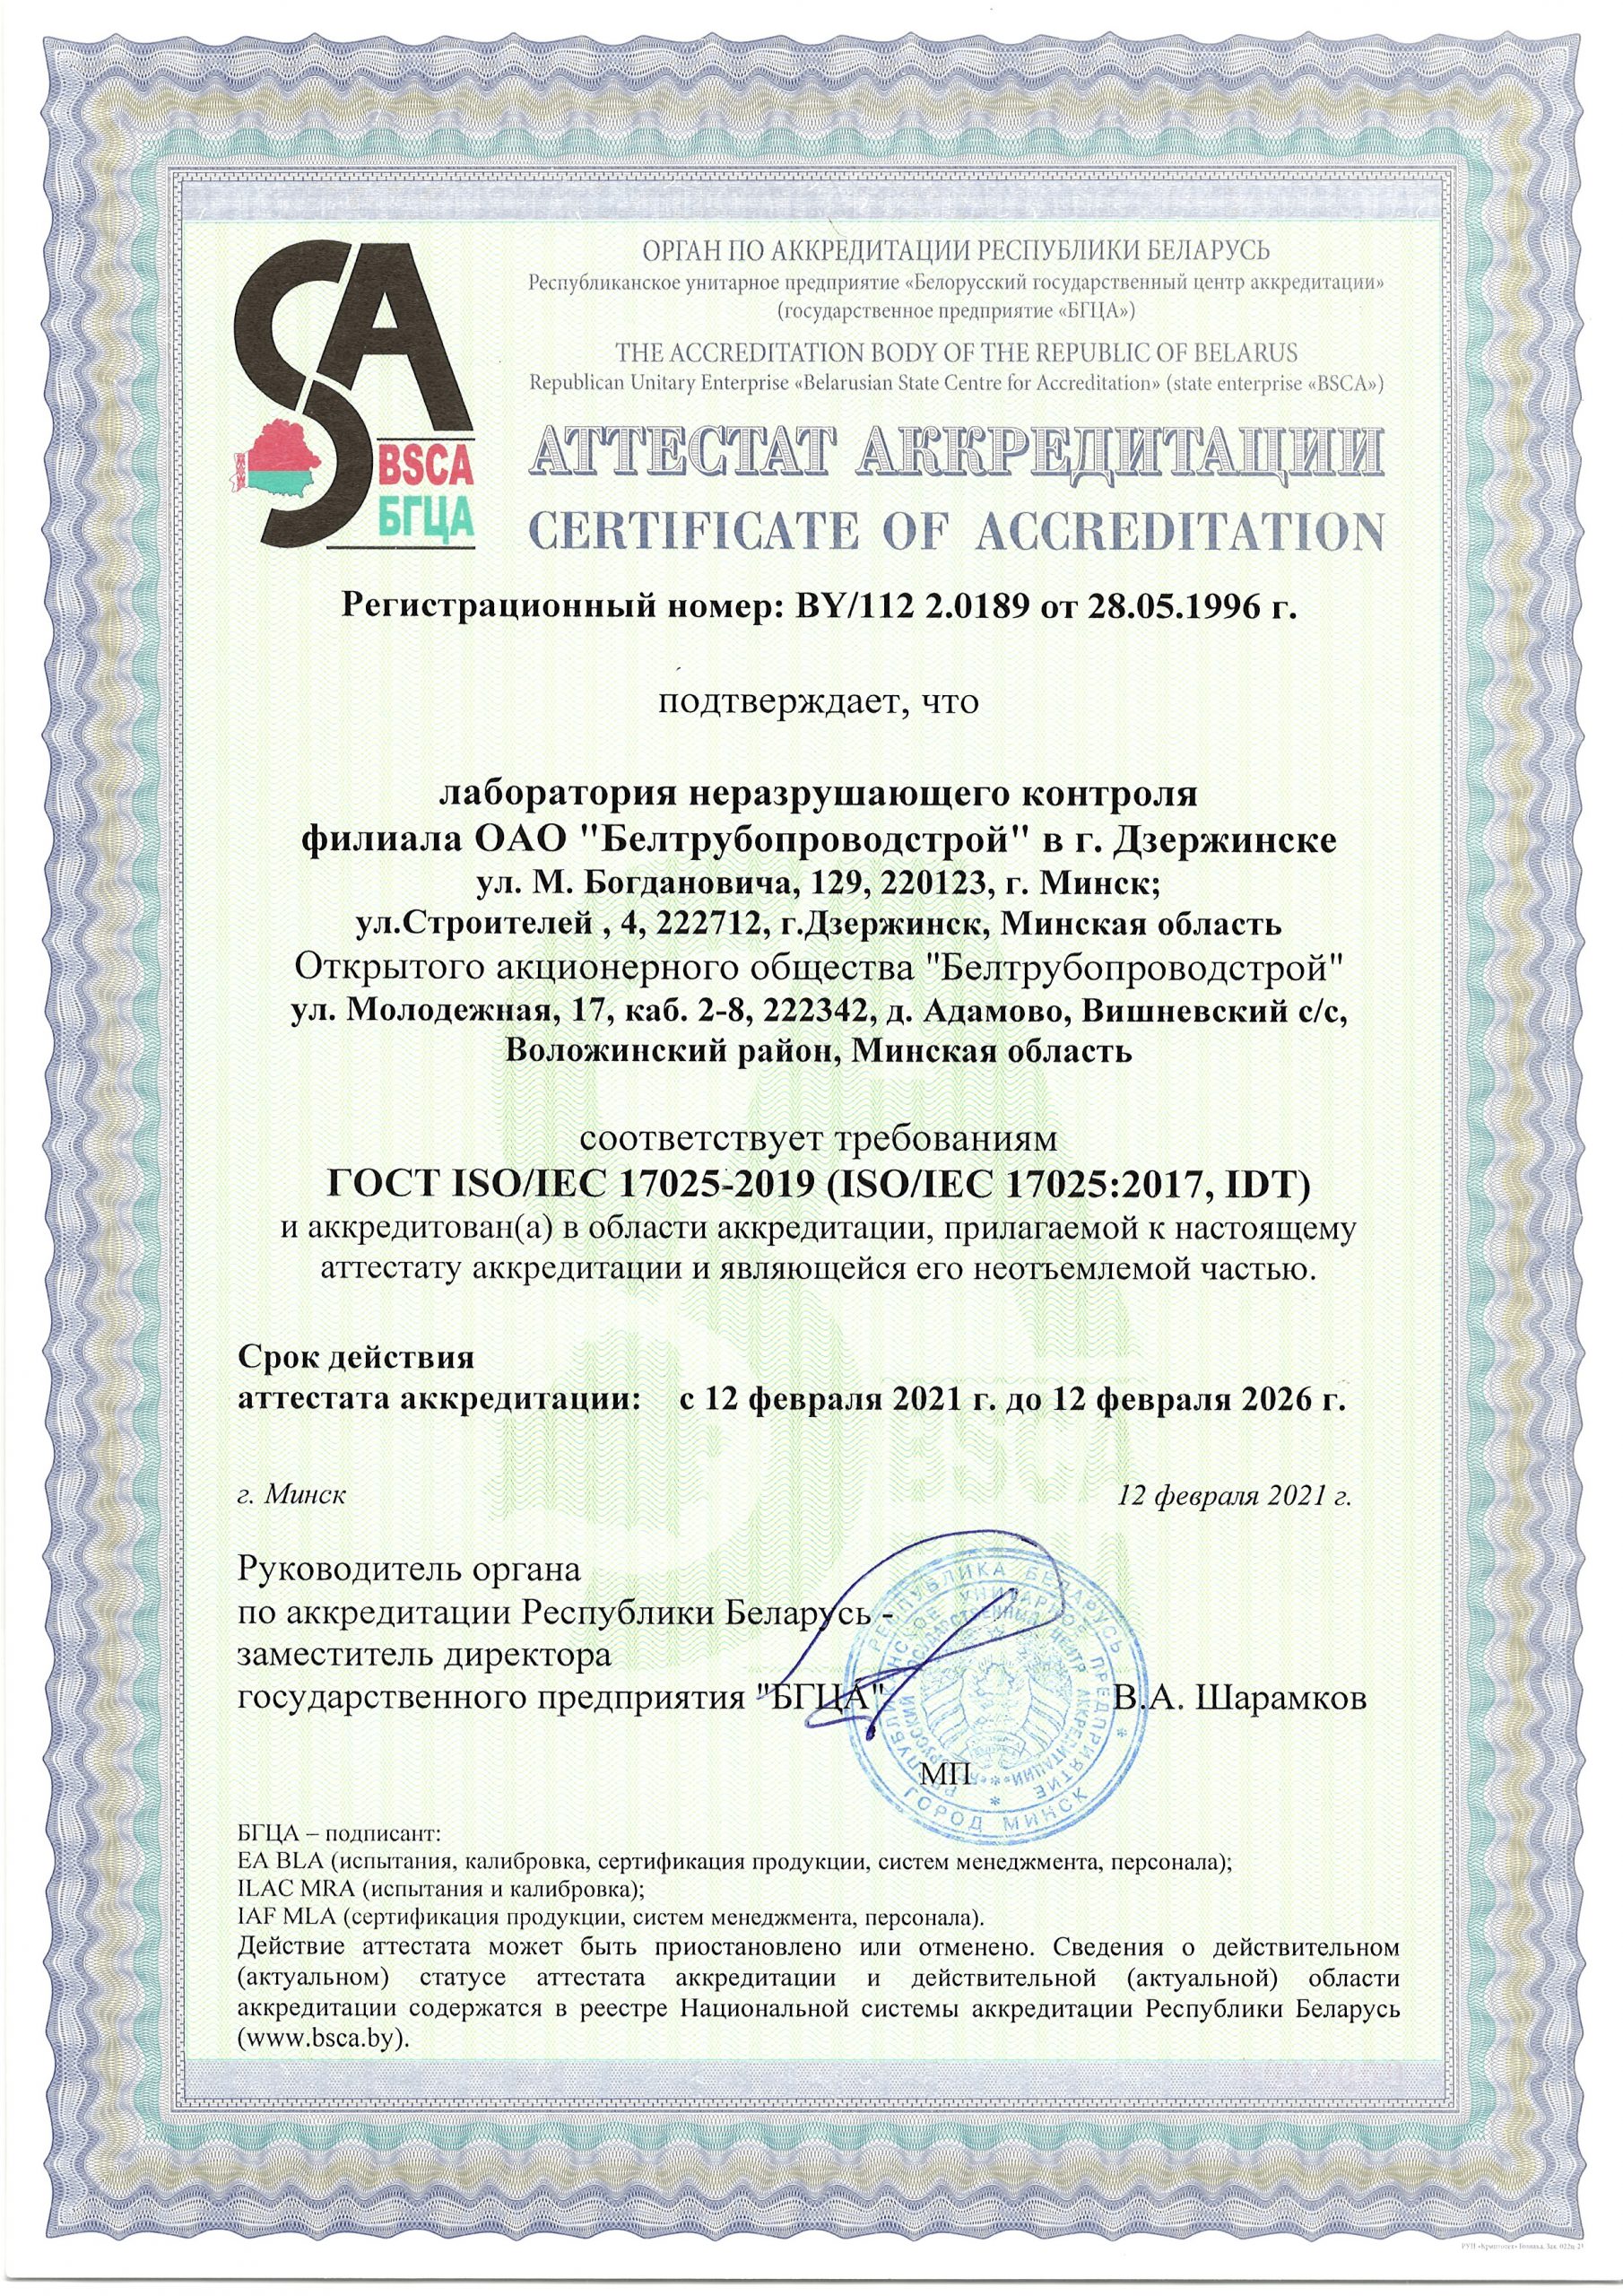 Permits for Belarus